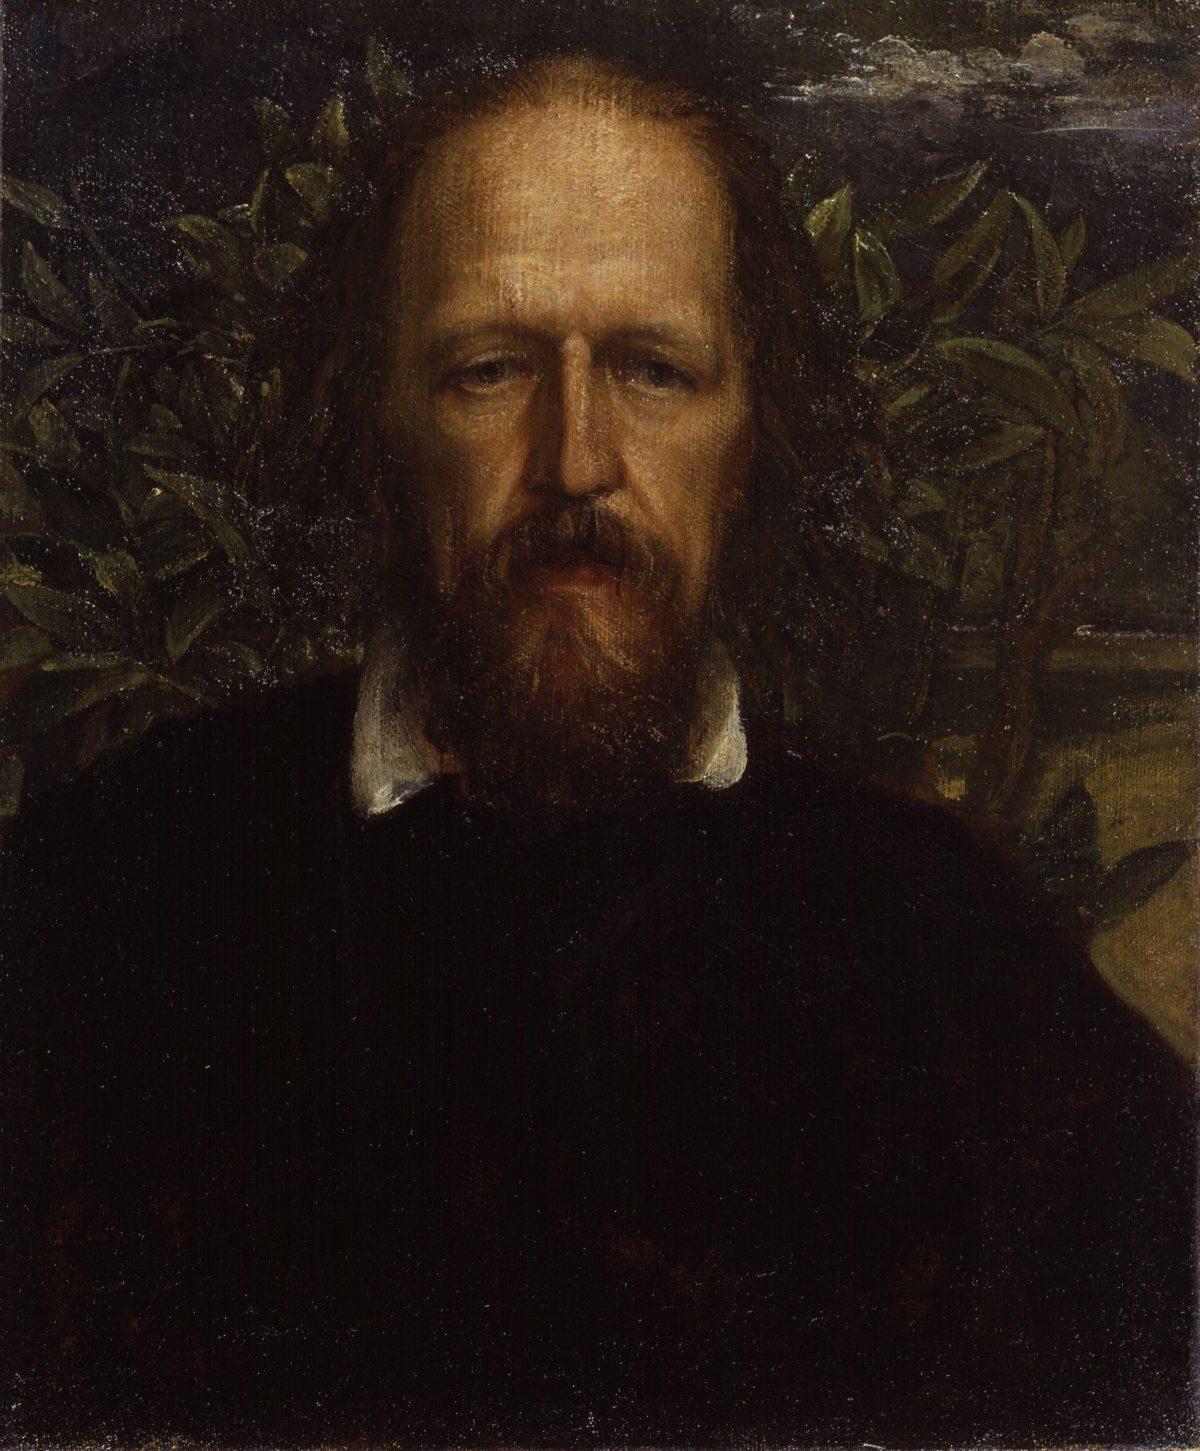 Portrait of Lord Alfred Tennyson by George Frederic Watts. (Public Domain)